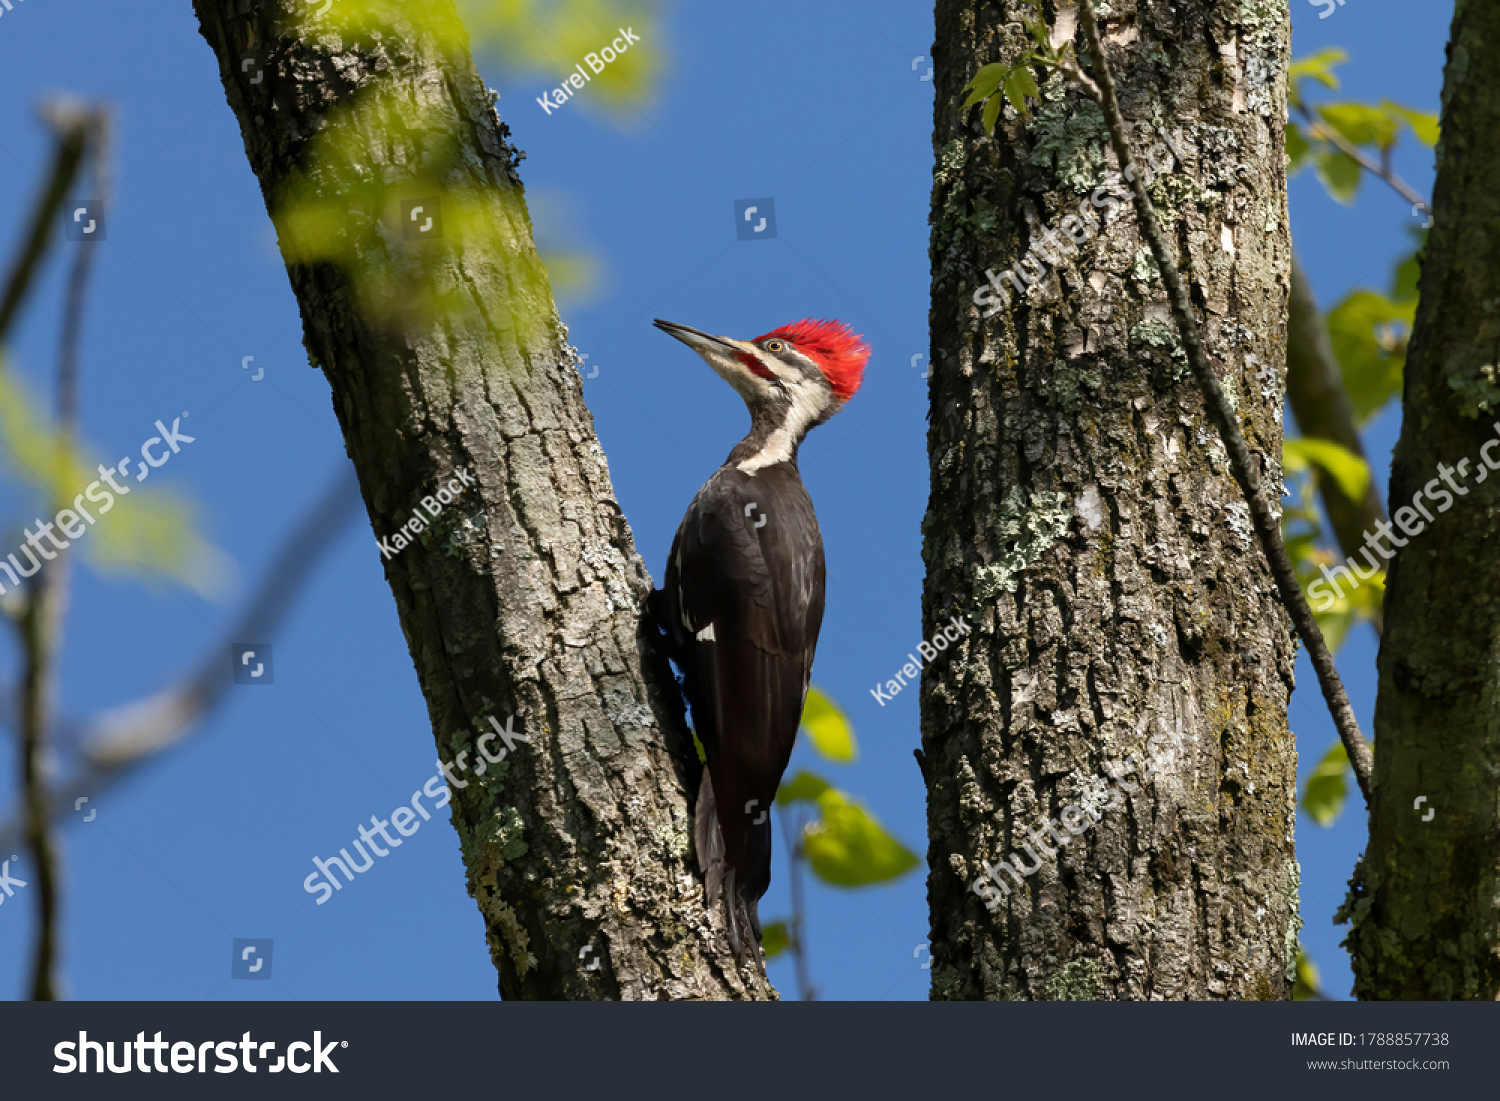 The pileated woodpecker.The bird native to North America.Currently the largest woodpecker in the United States after the critically endangered and possibly extinct ivory woodpecker. #1788857738